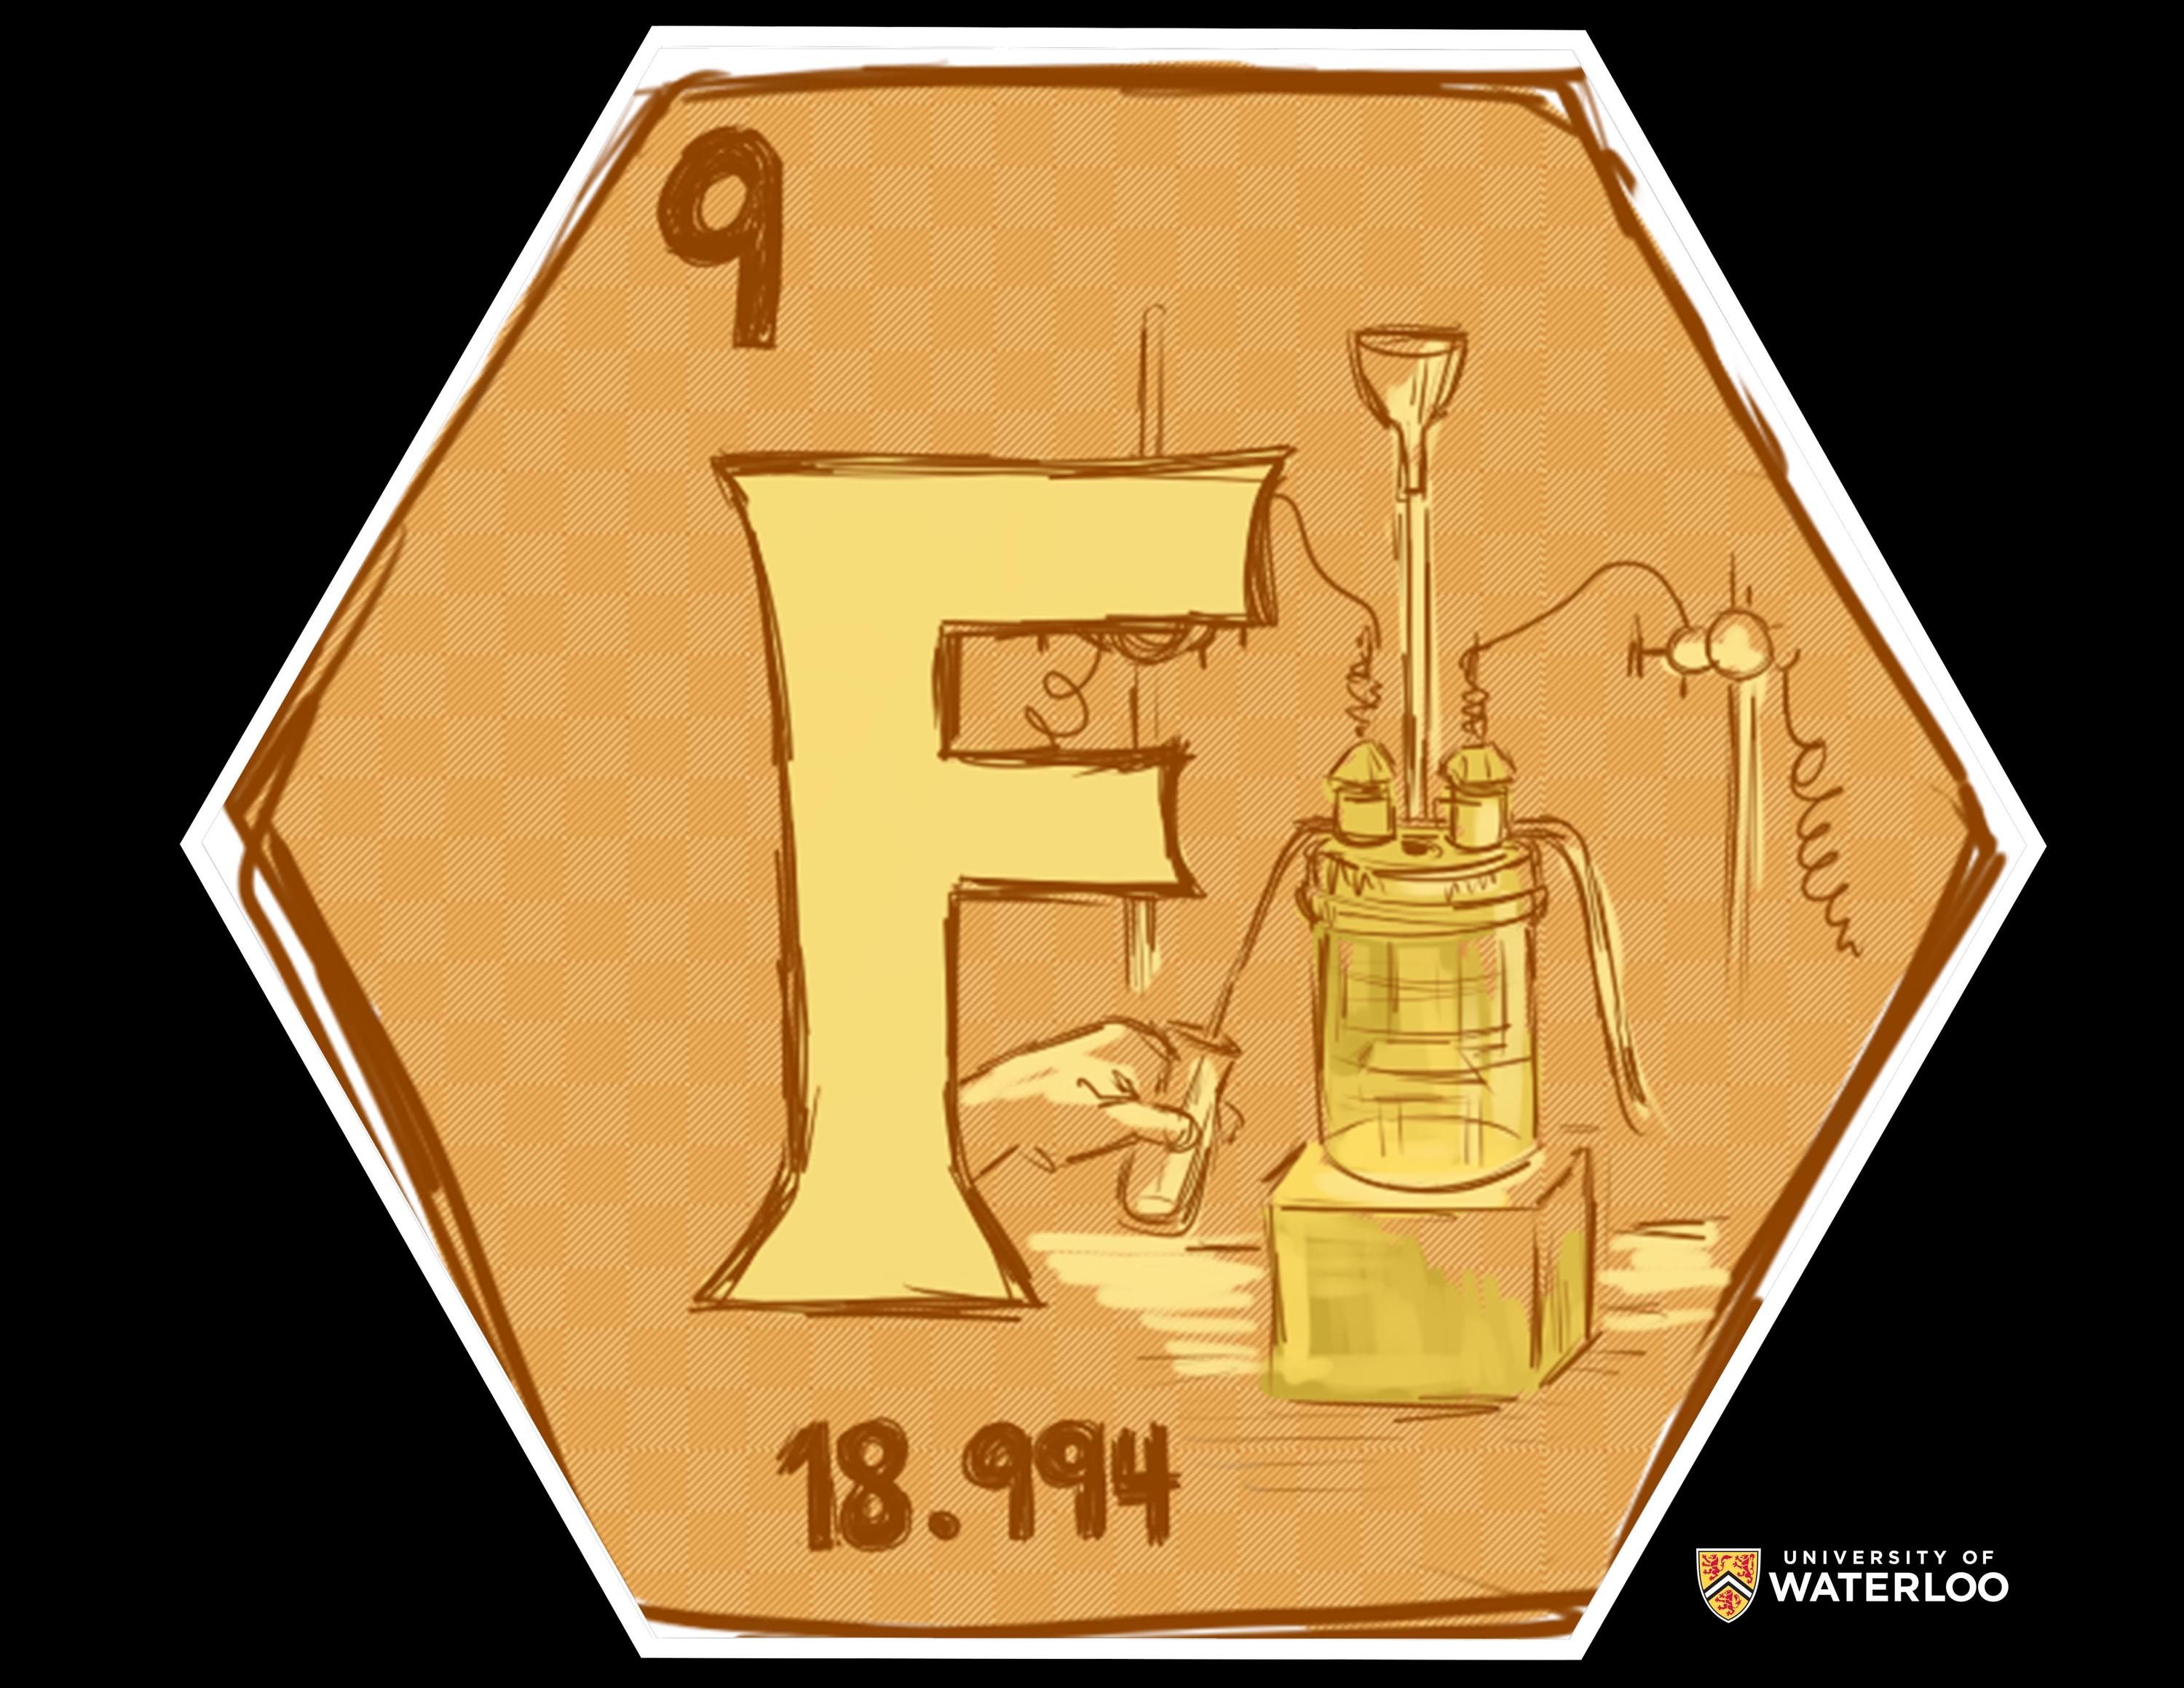 Digital illustration in yellows and oranges. Chemical symbol “F” appears centre. Above “9”. Bottom “18.994”. Background shows electrolysis experiment used to generate fluorine.